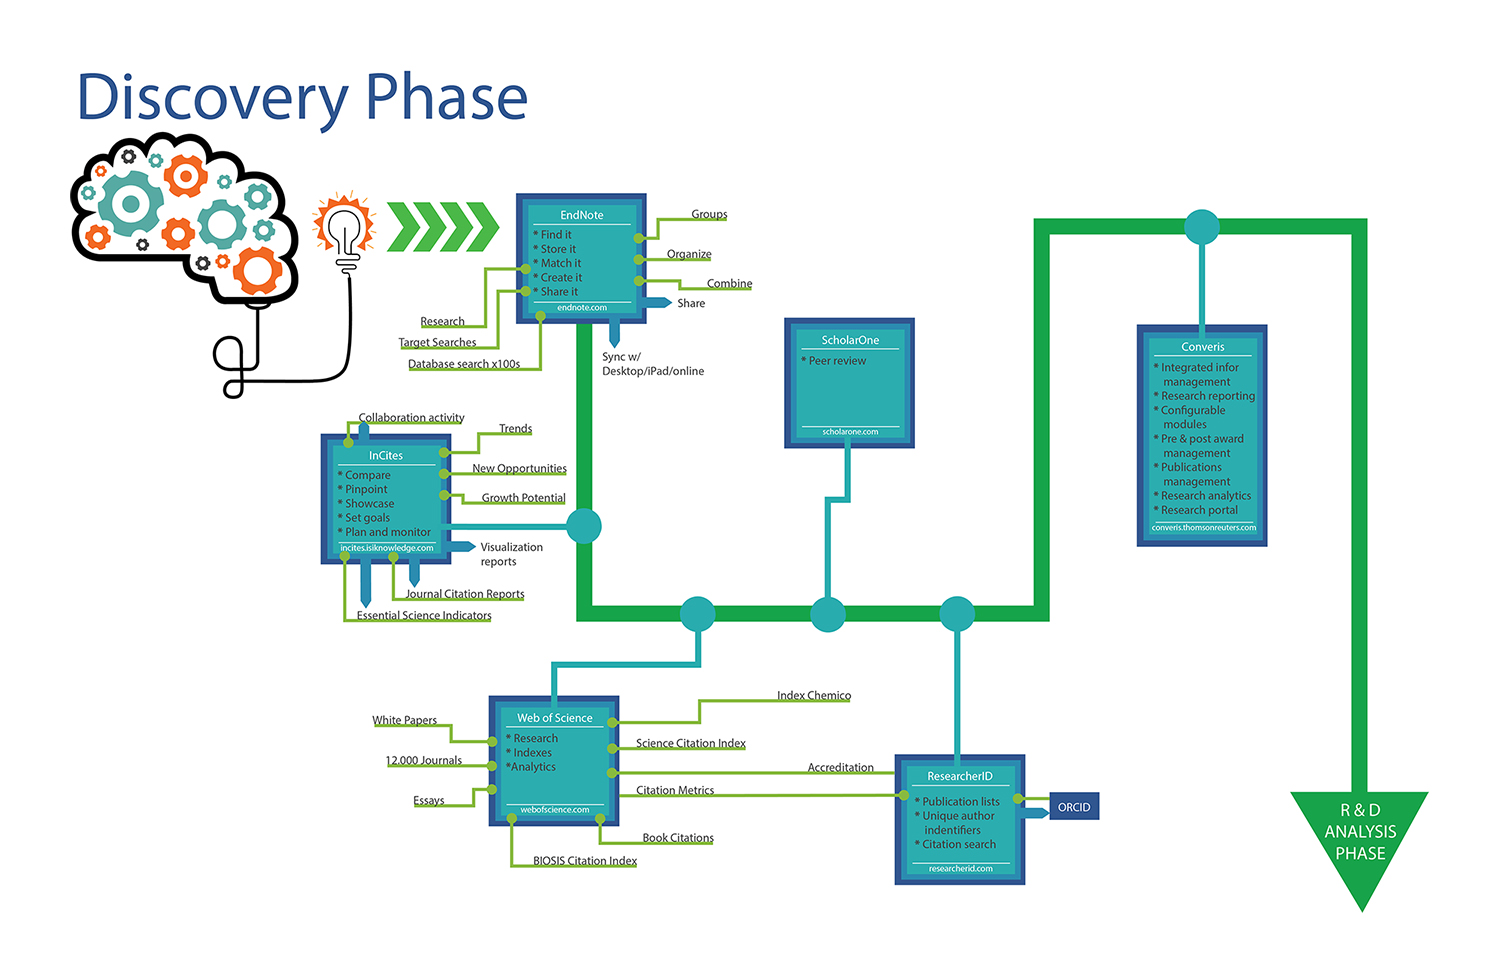 Discovery Phase Flowchart